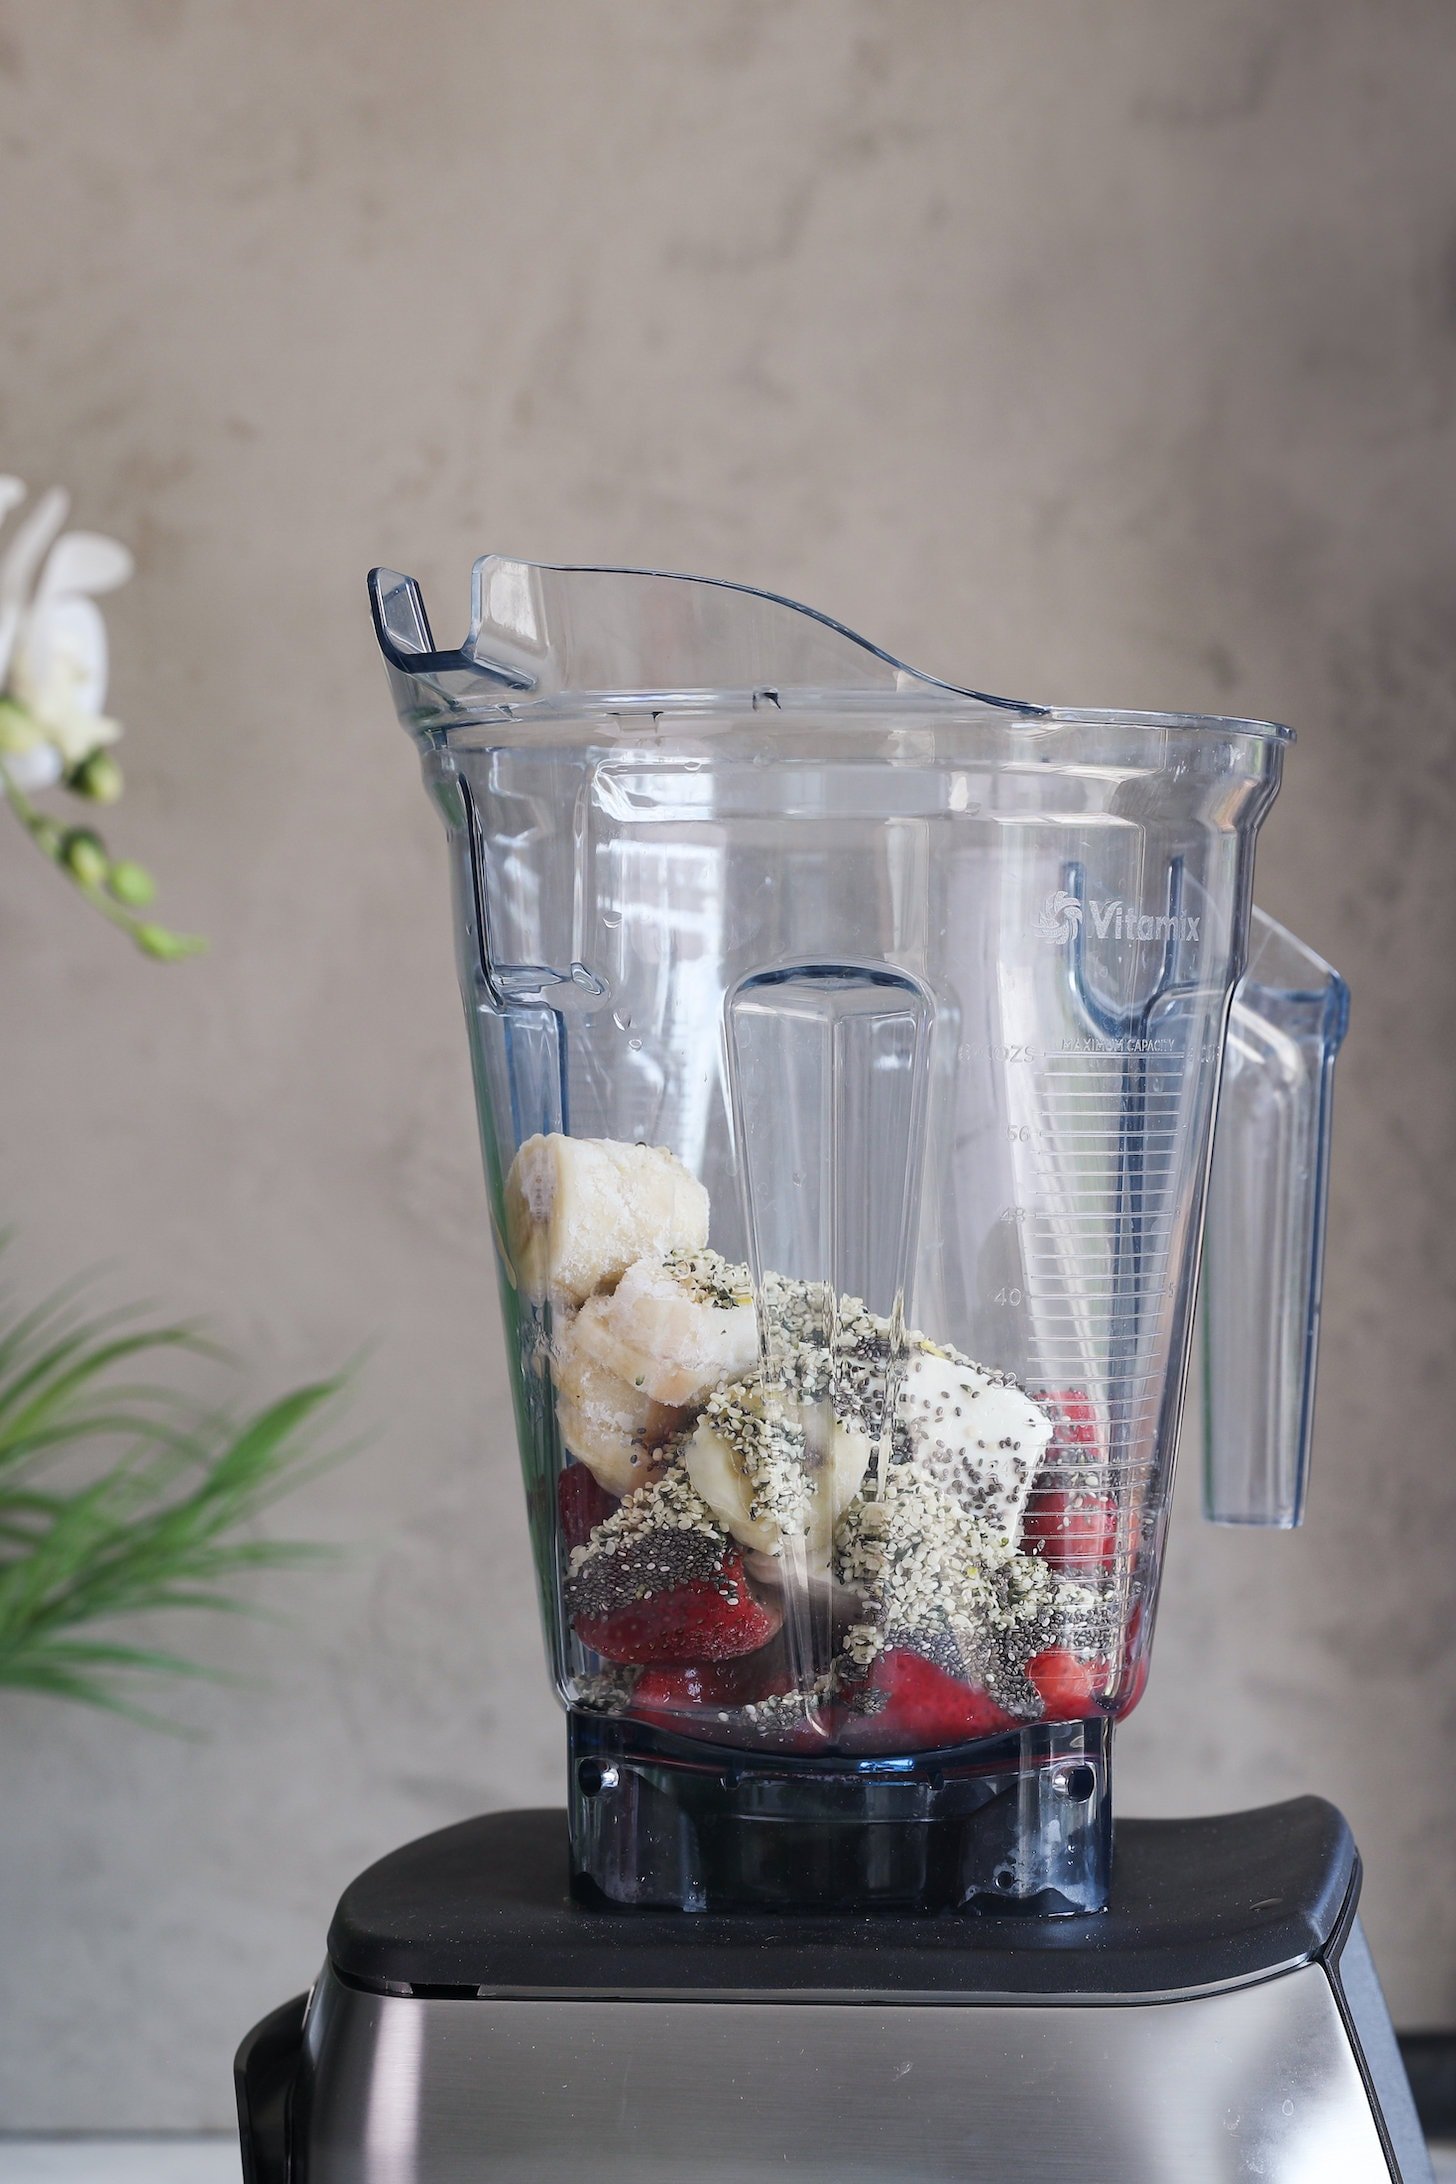 Perspective image of a blender with banana, berries and seeds in it.